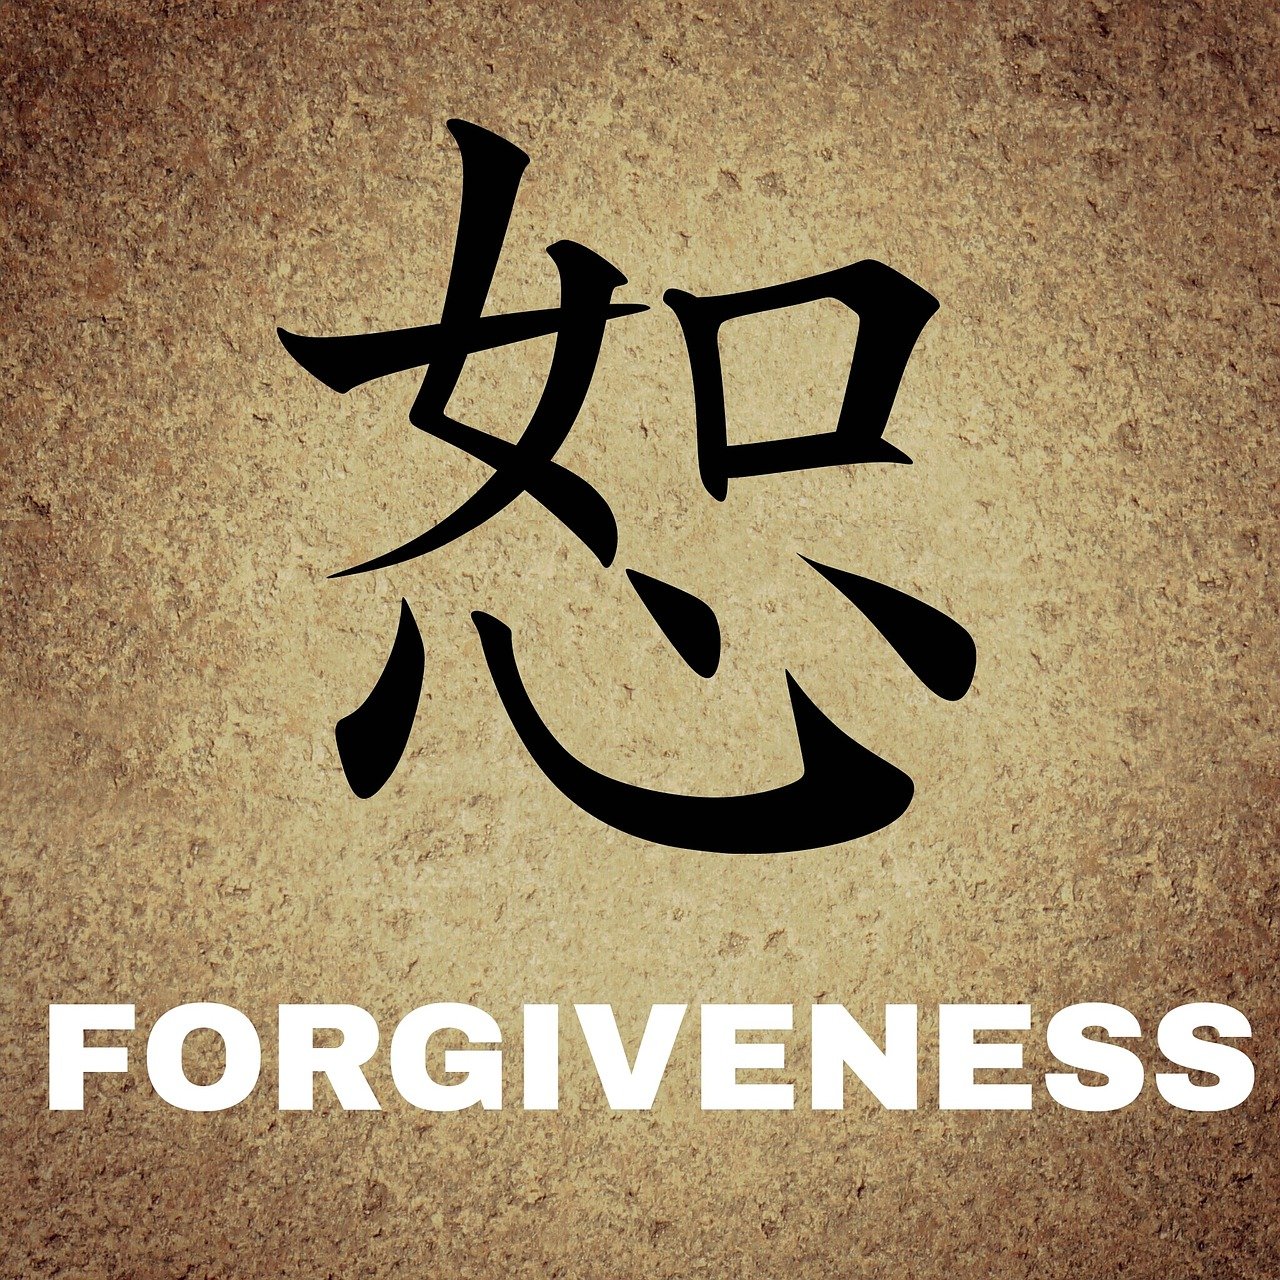 chinese, characters, background, forgiveness